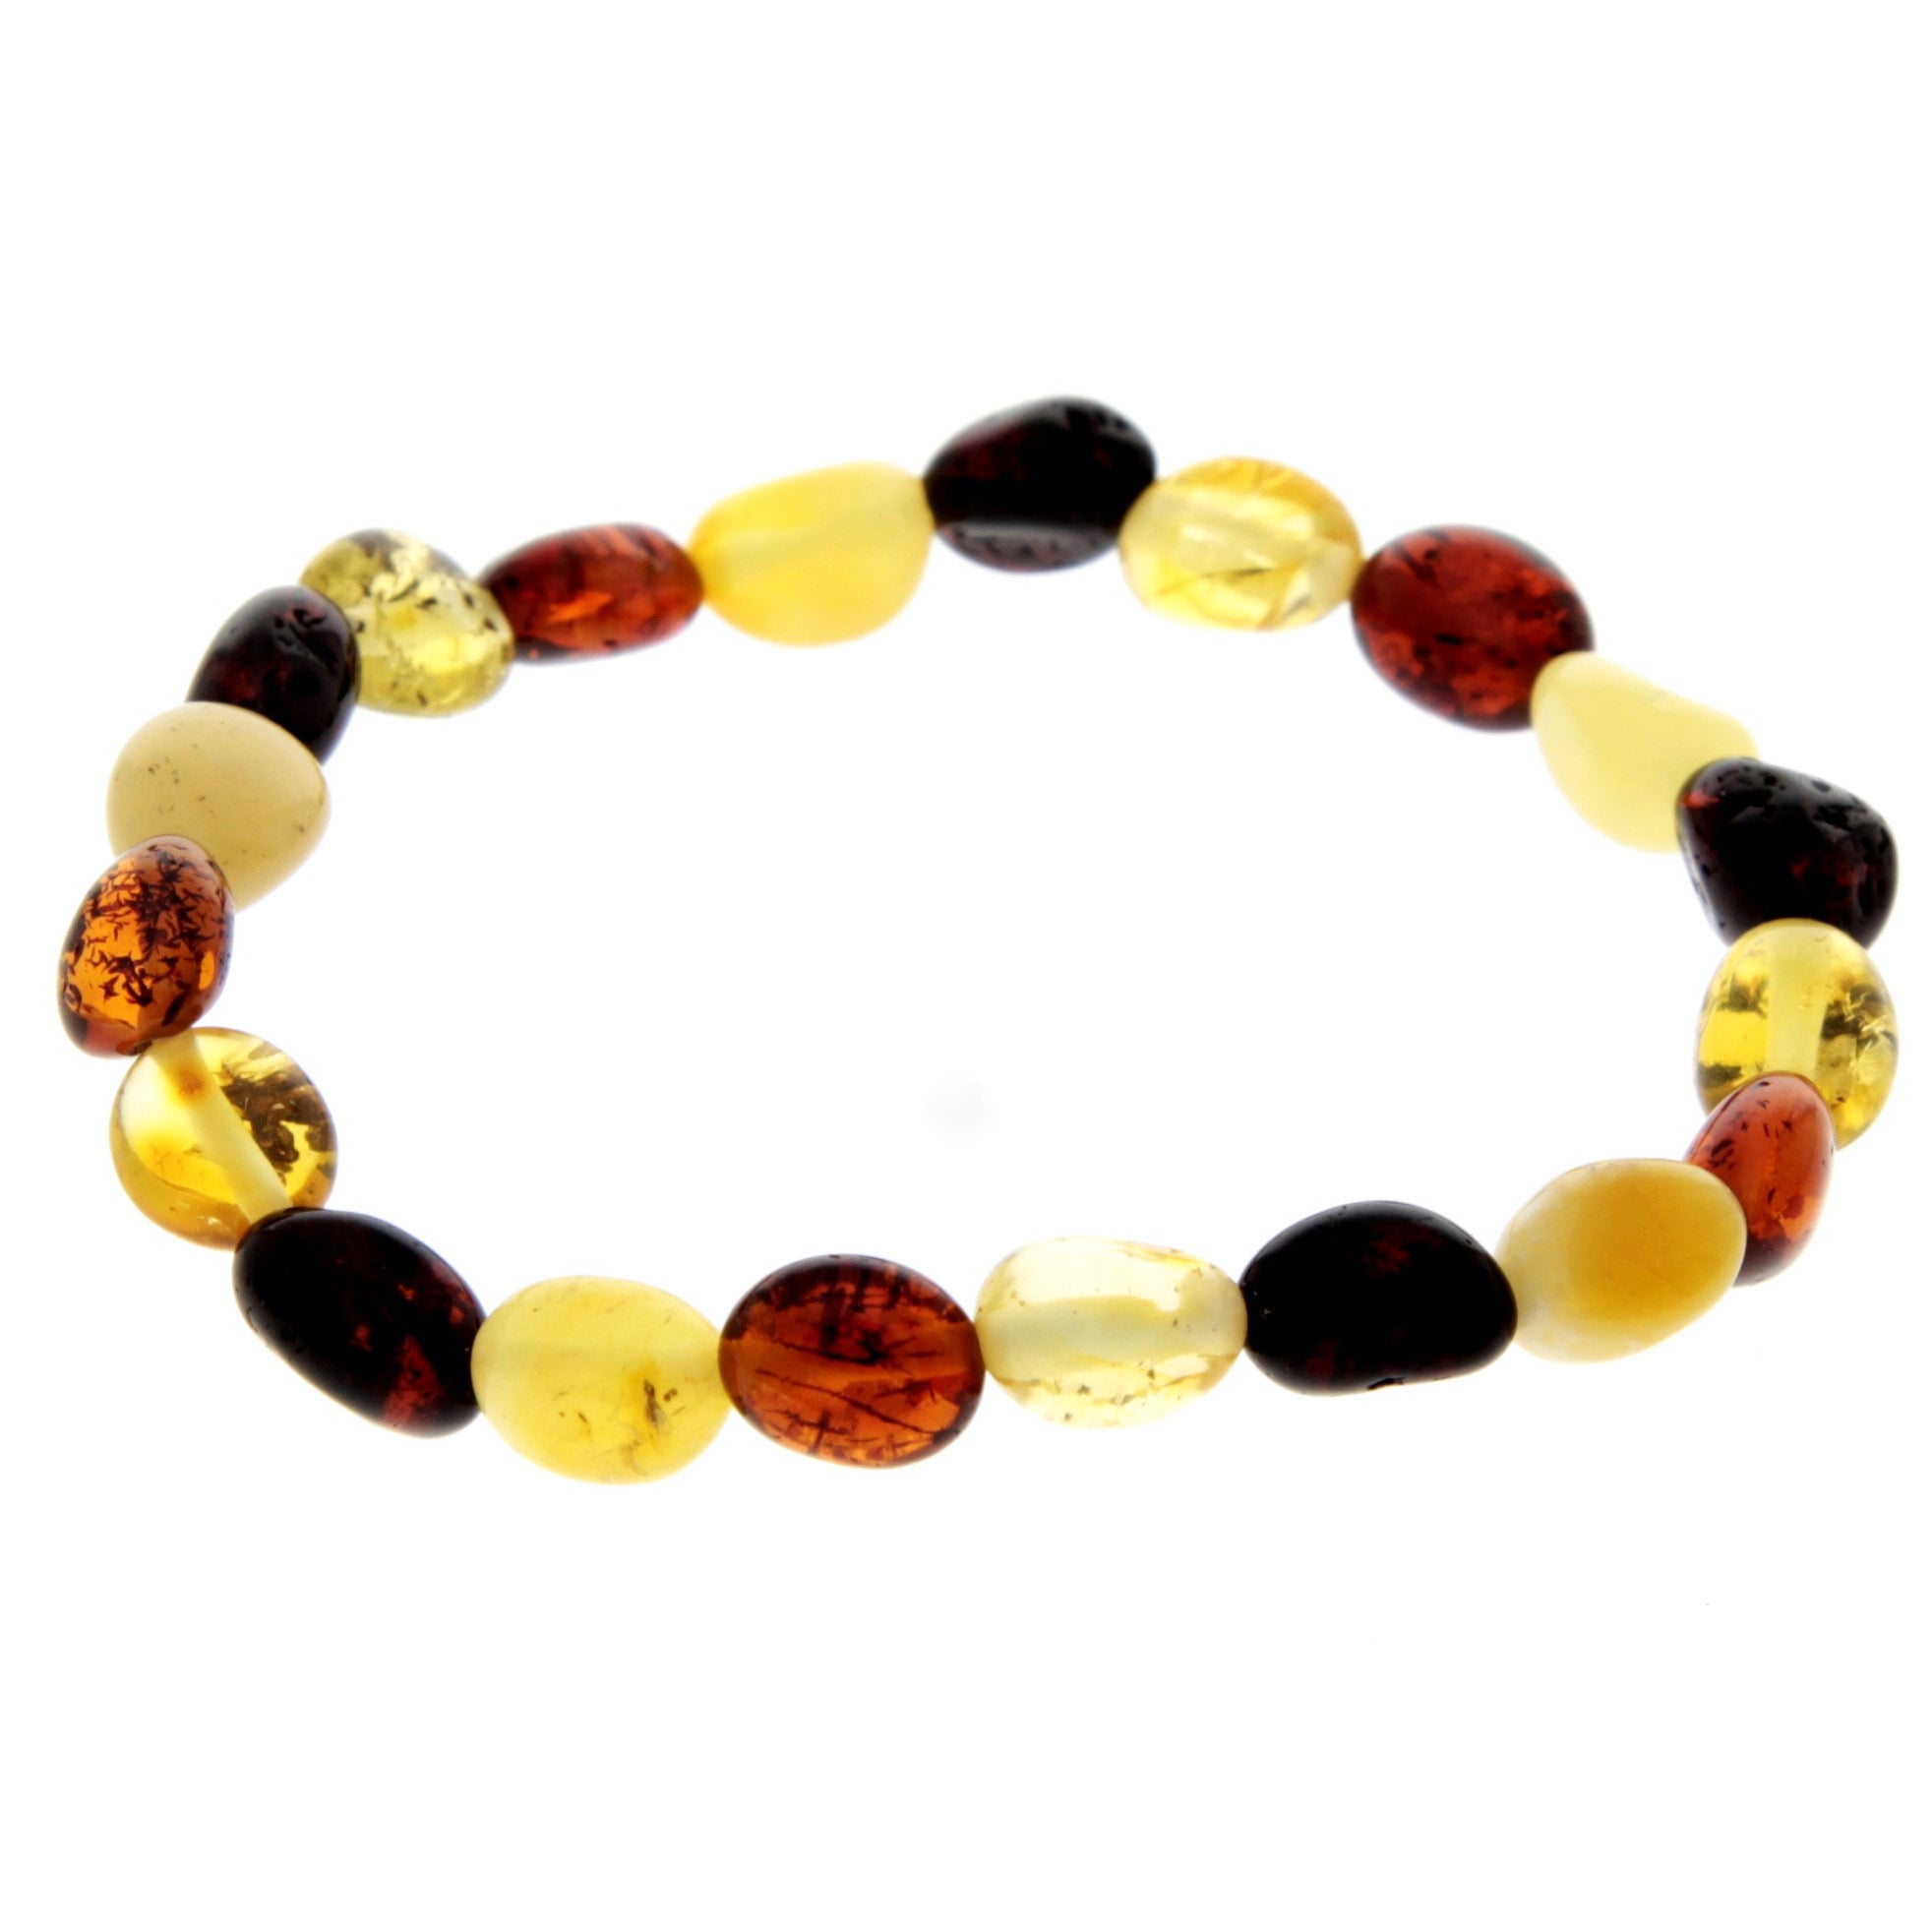 Certified Baltic Amber Bean Beads Bracelet Elasticated - Sizes Child to Adult